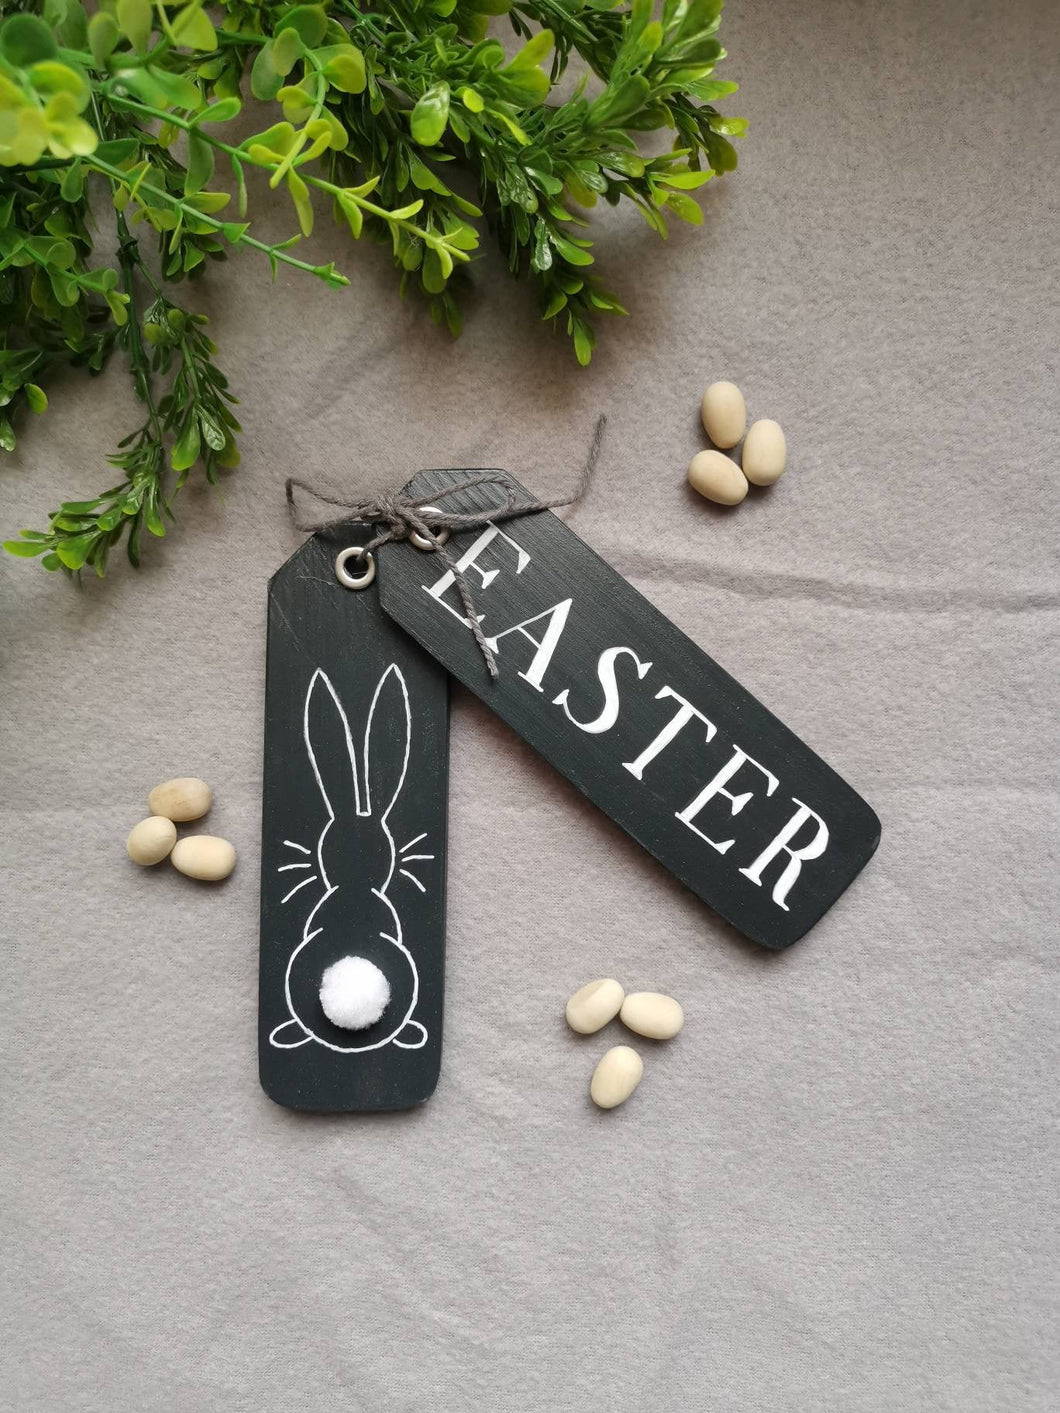 Wooden Easter Tags, Easter signs, spring decor, tiered tray accessories, Monochrome, wooden Hanging tags,